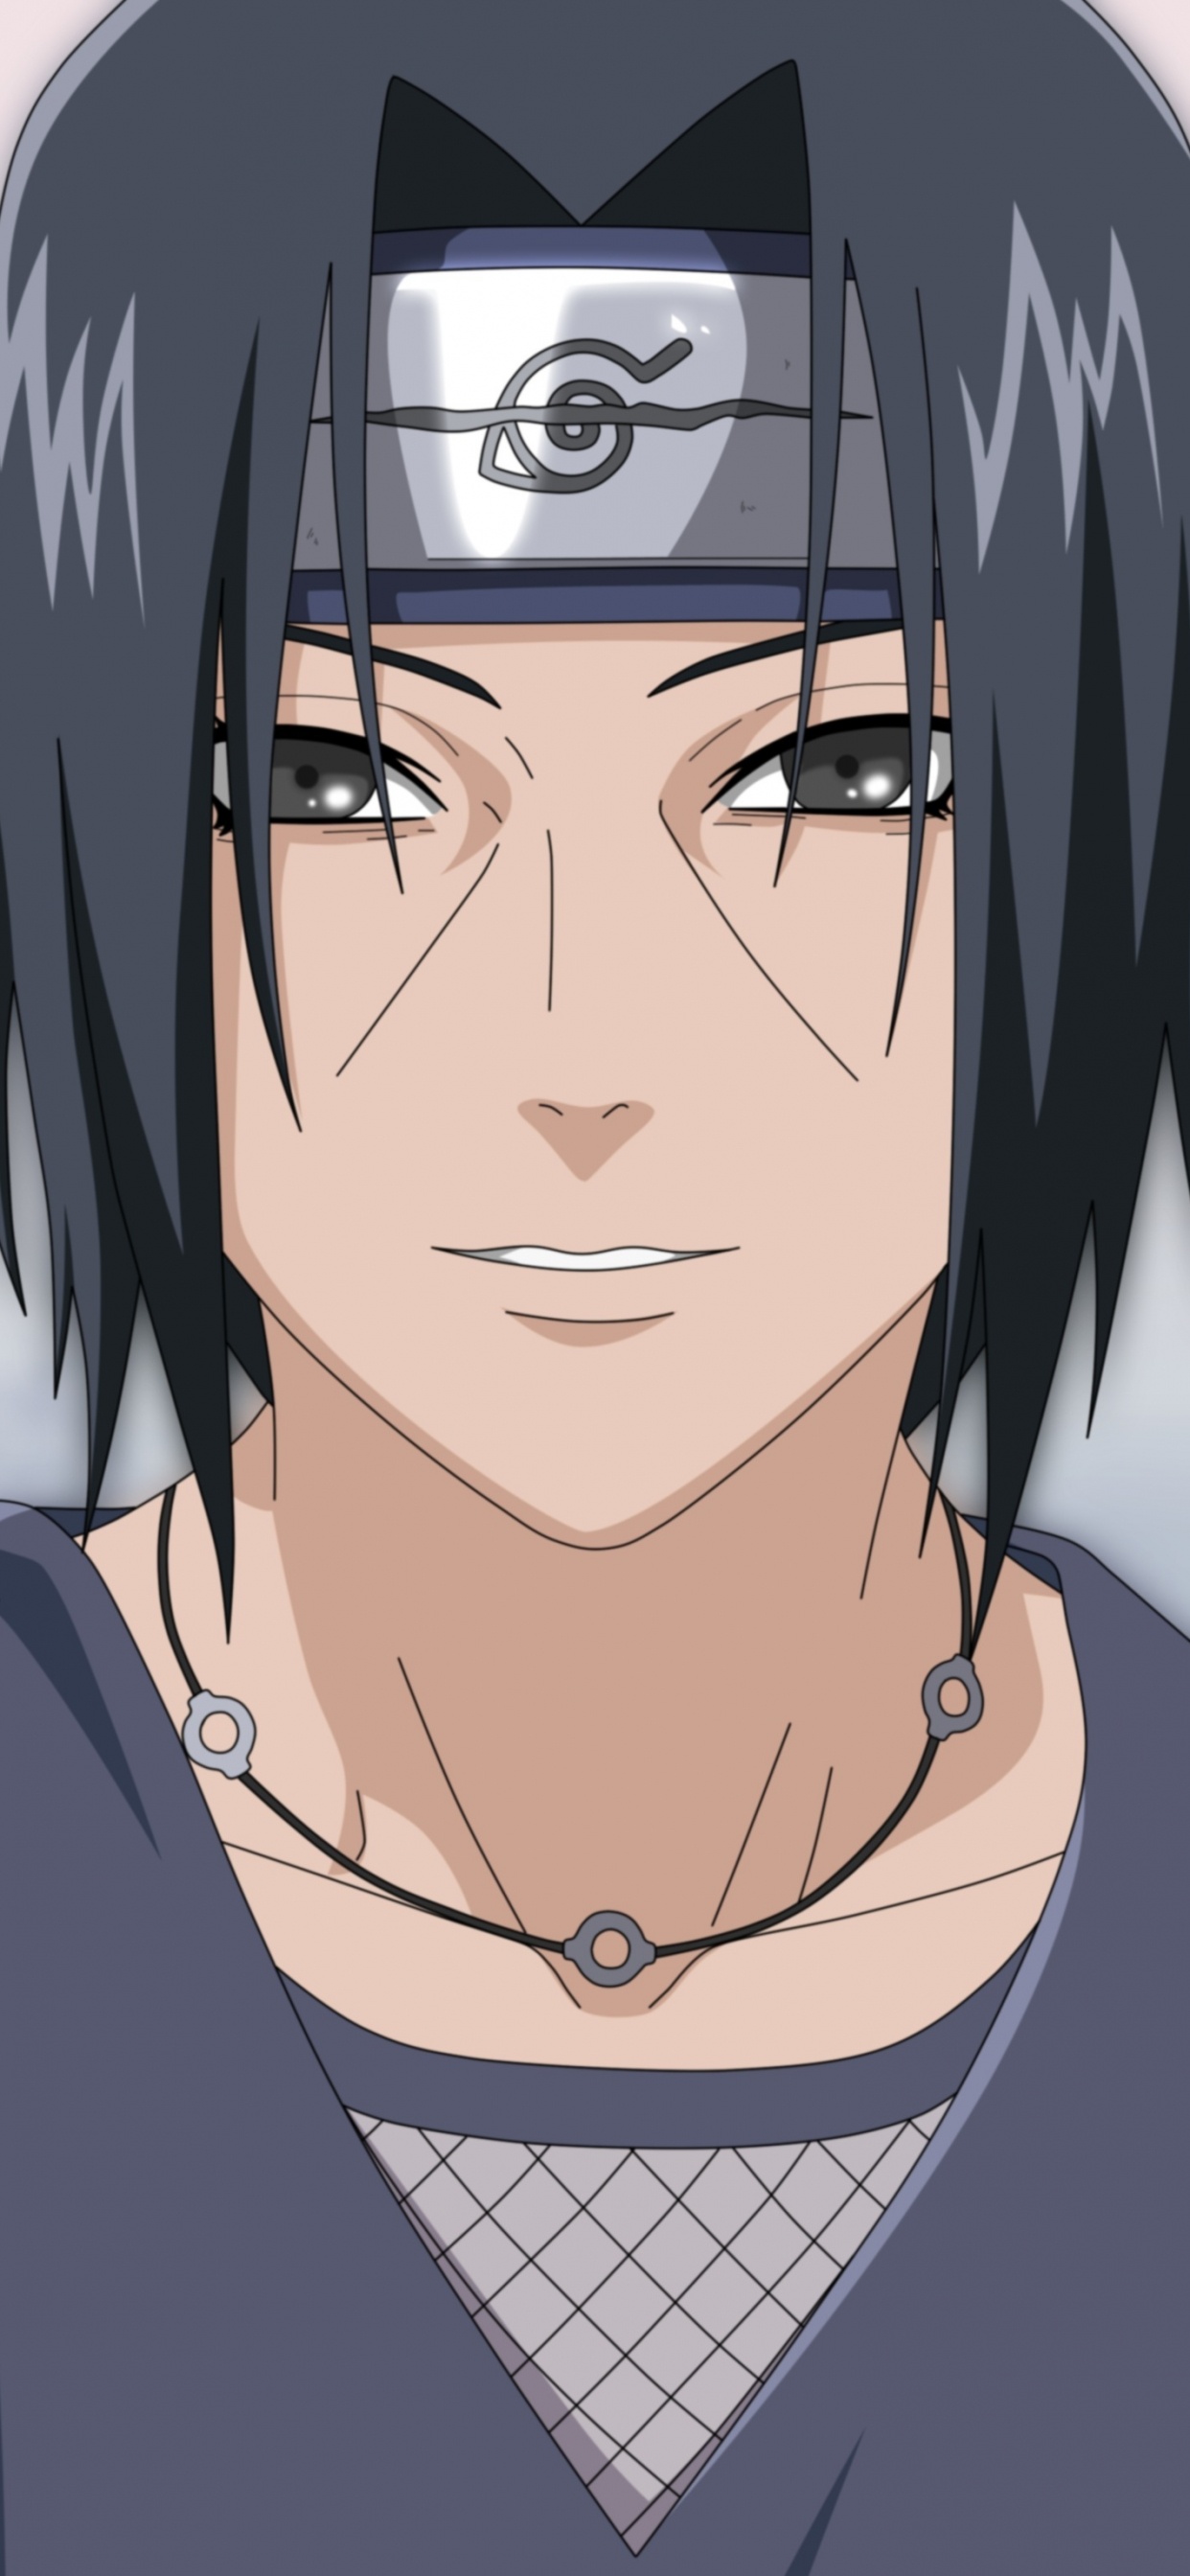 Black Haired Male Anime Character. Wallpaper in 1242x2688 Resolution